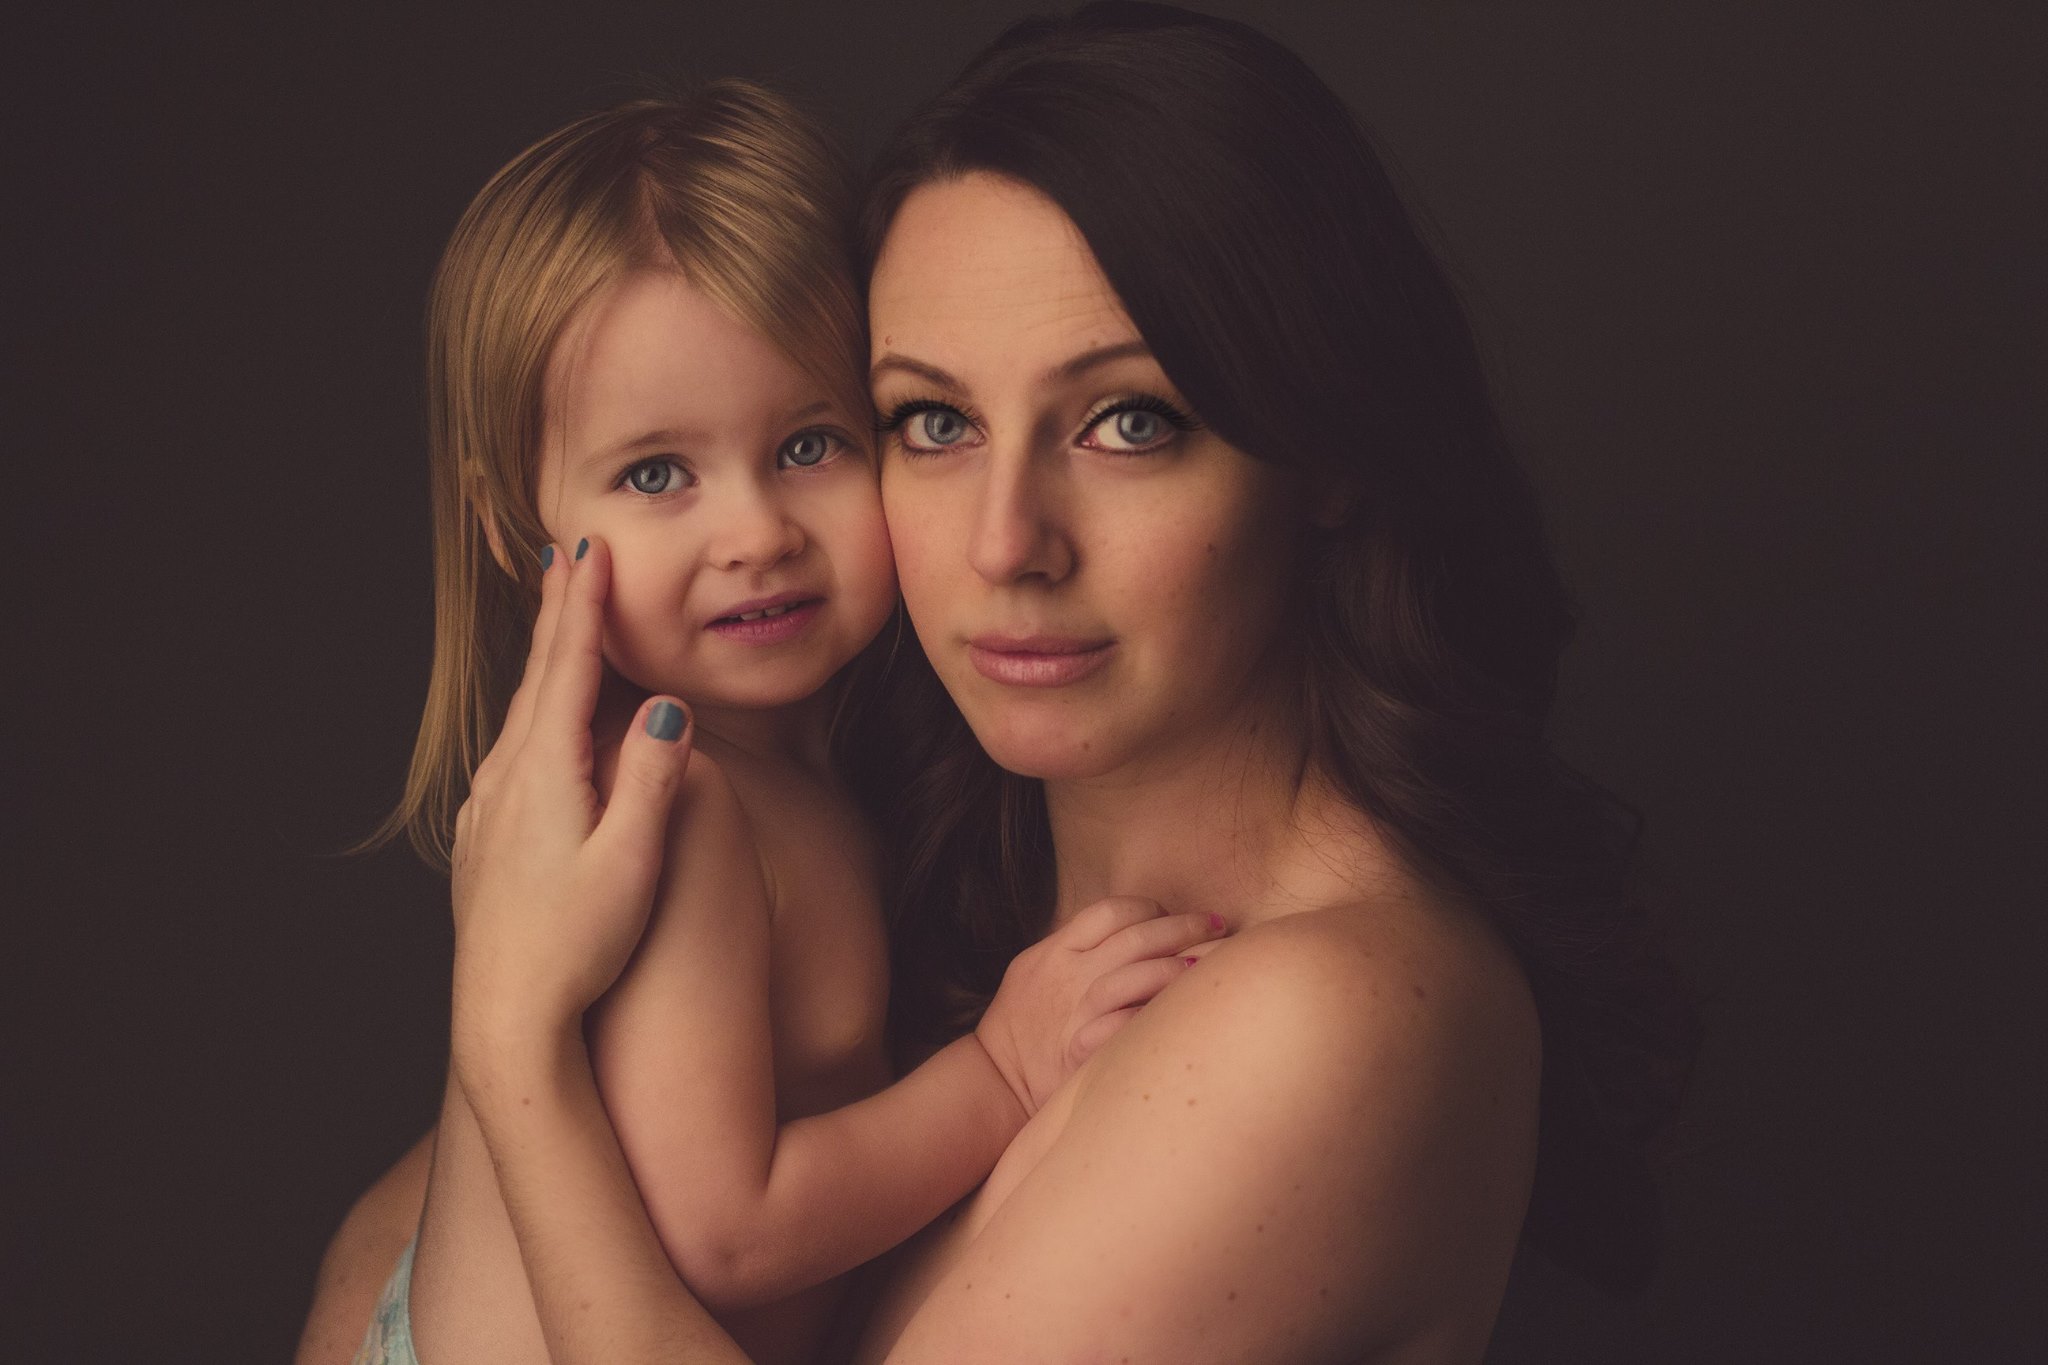 mother and daughter picture ideas, daily fan favorite